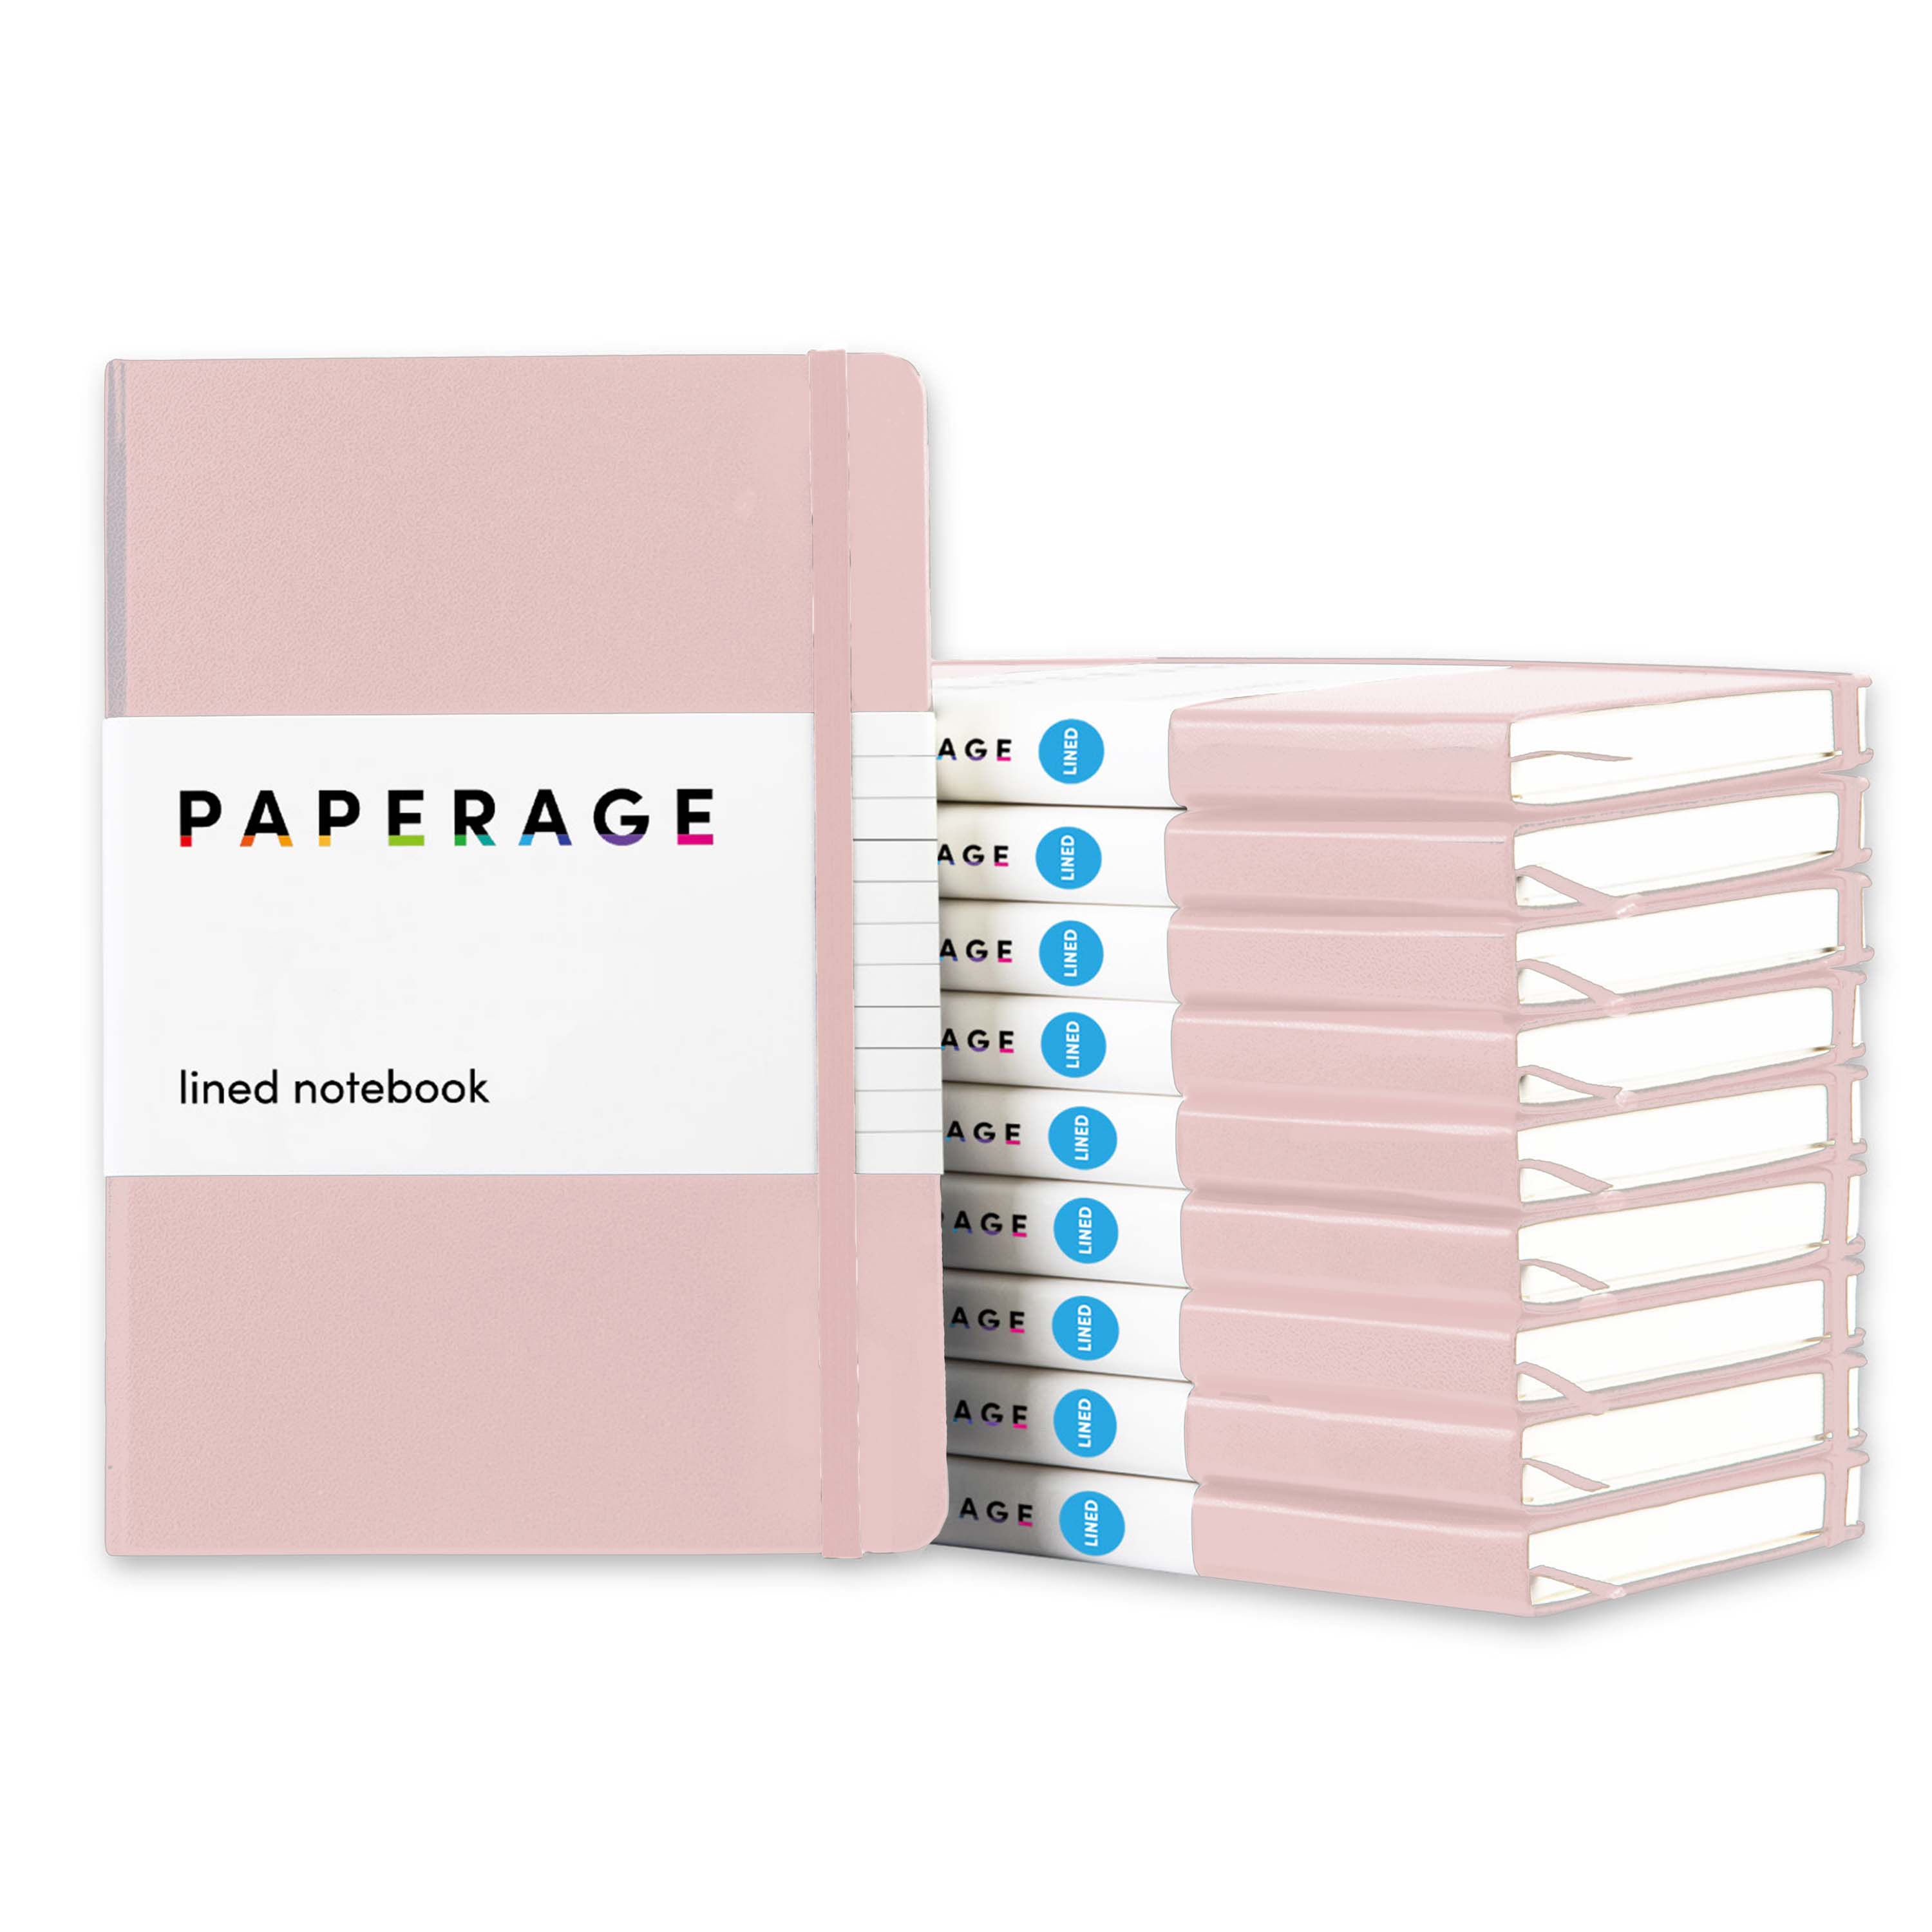 PAPERAGE Lined Journal Notebook Hard Cover 5.7 x 8 Inches White